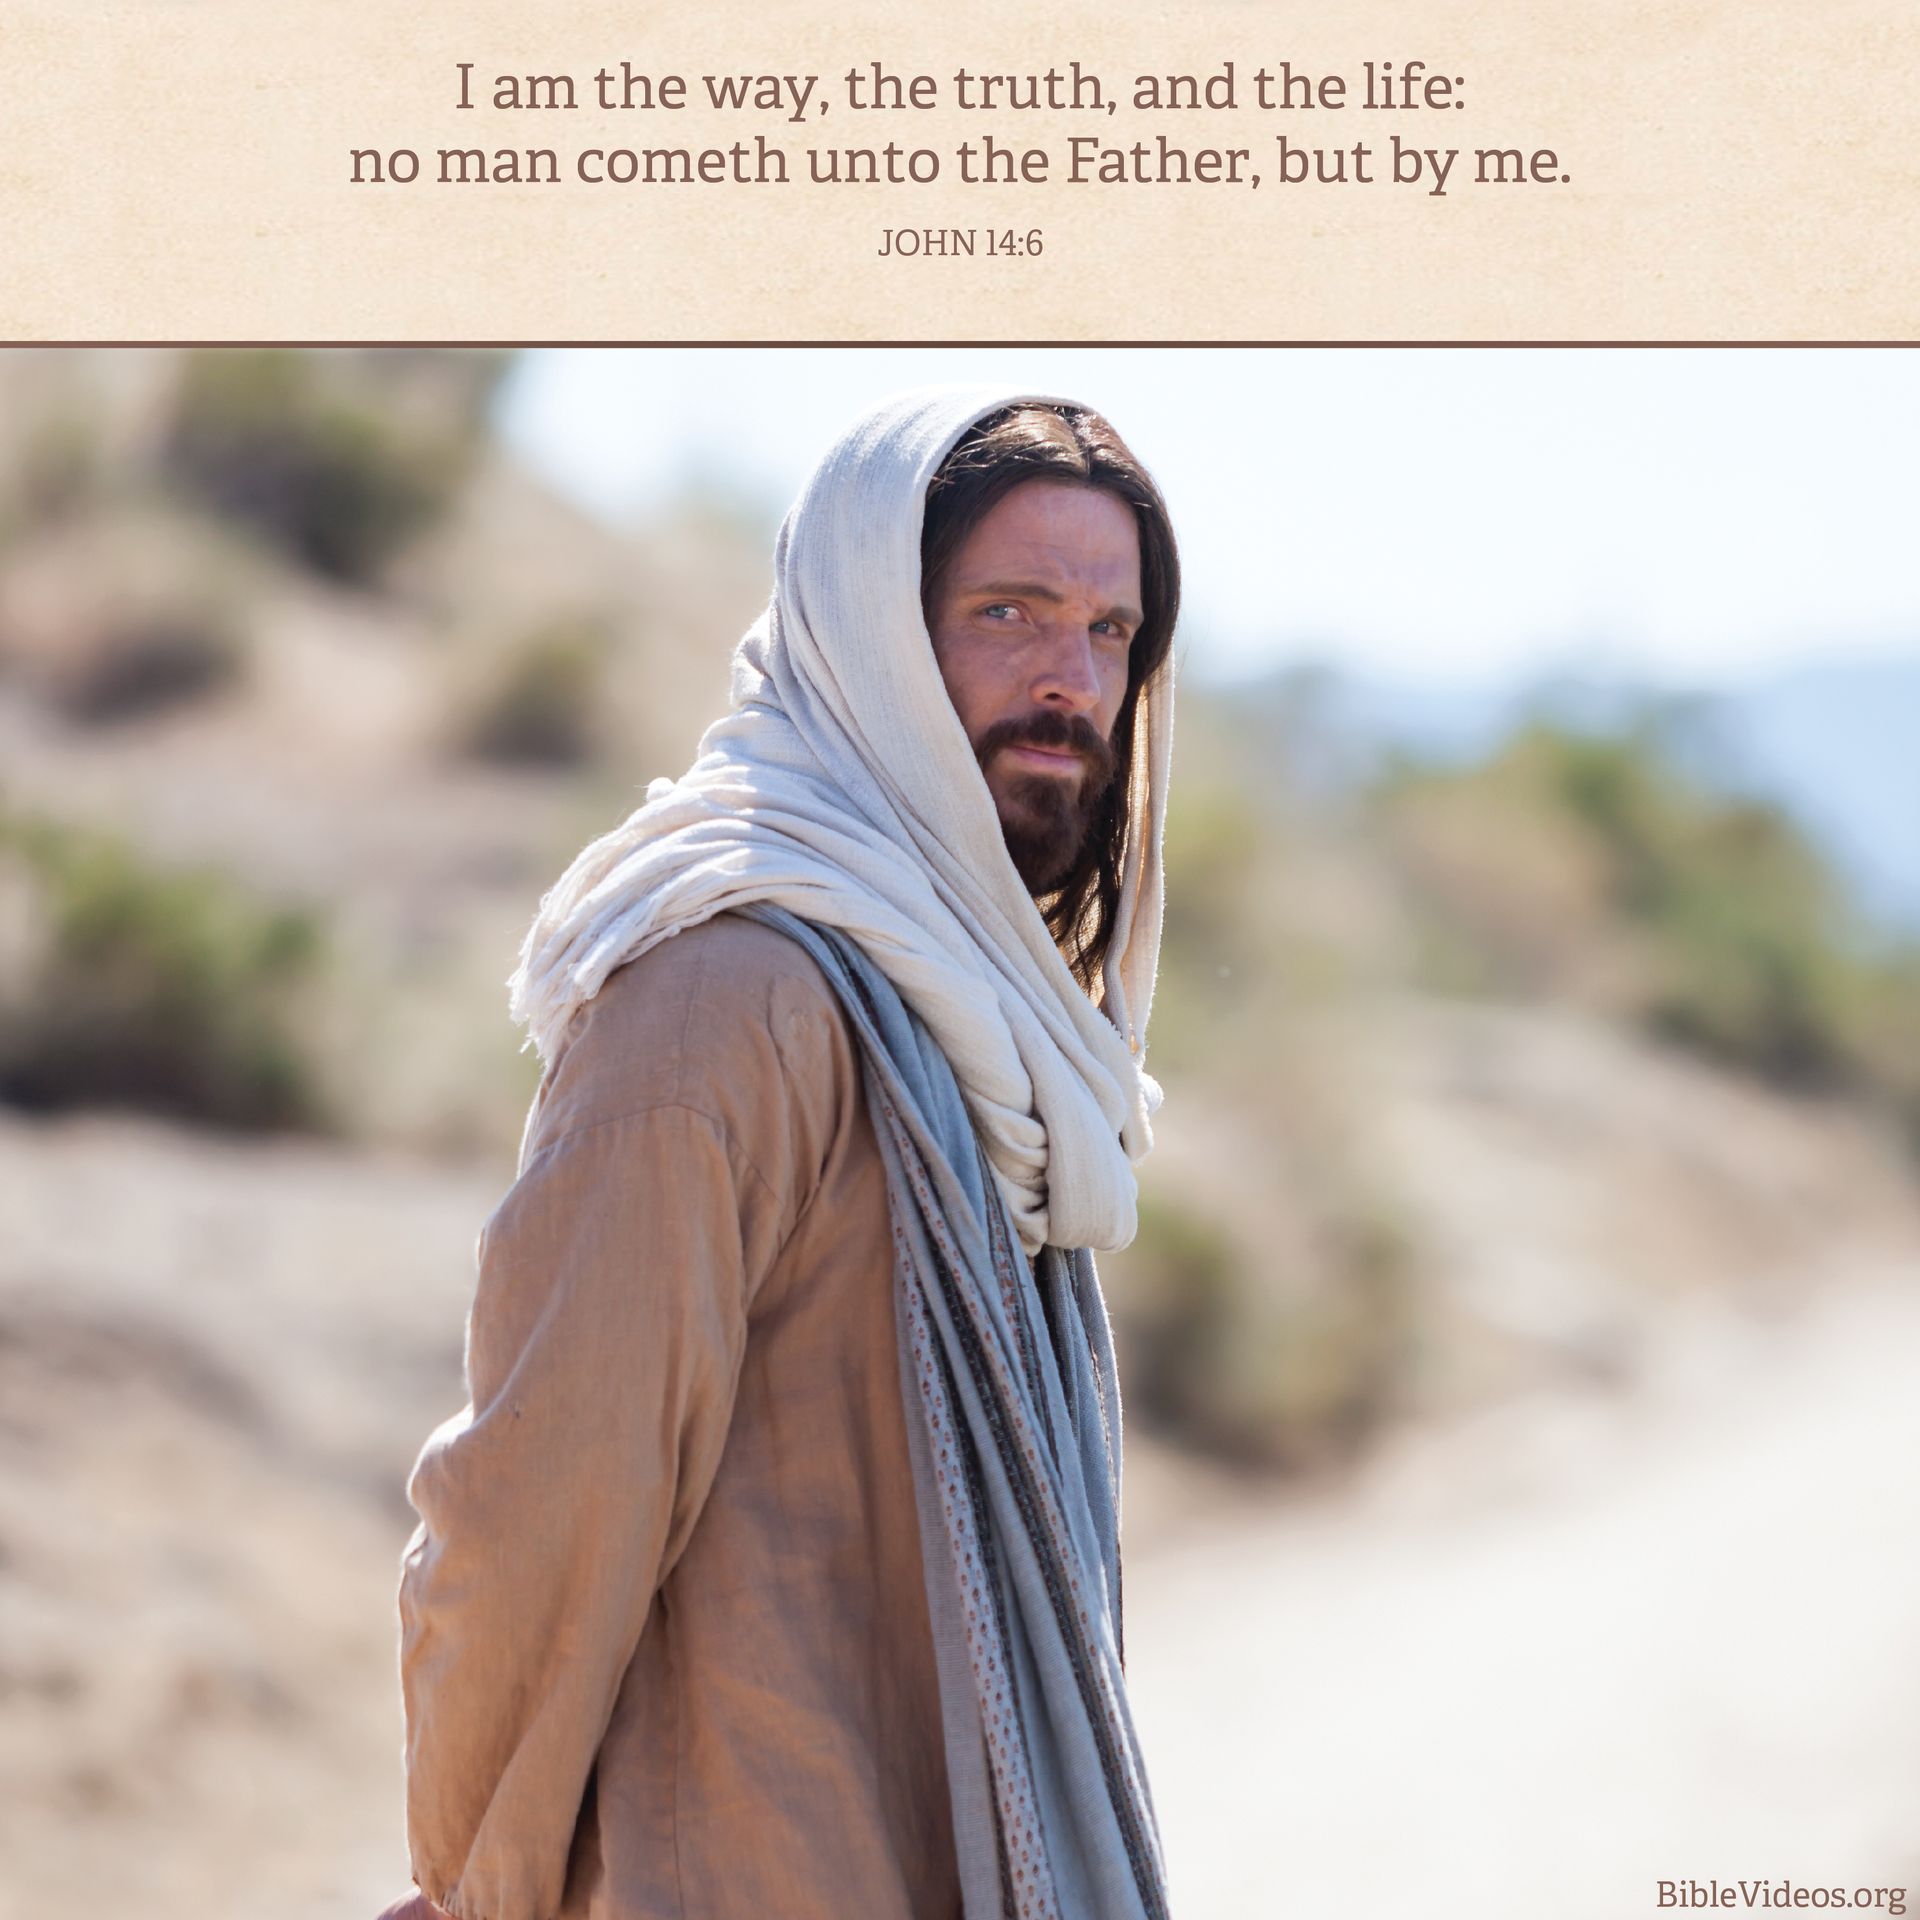 “I am the way, the truth, and the life: no man cometh unto the Father, but by me.”—John 14:6